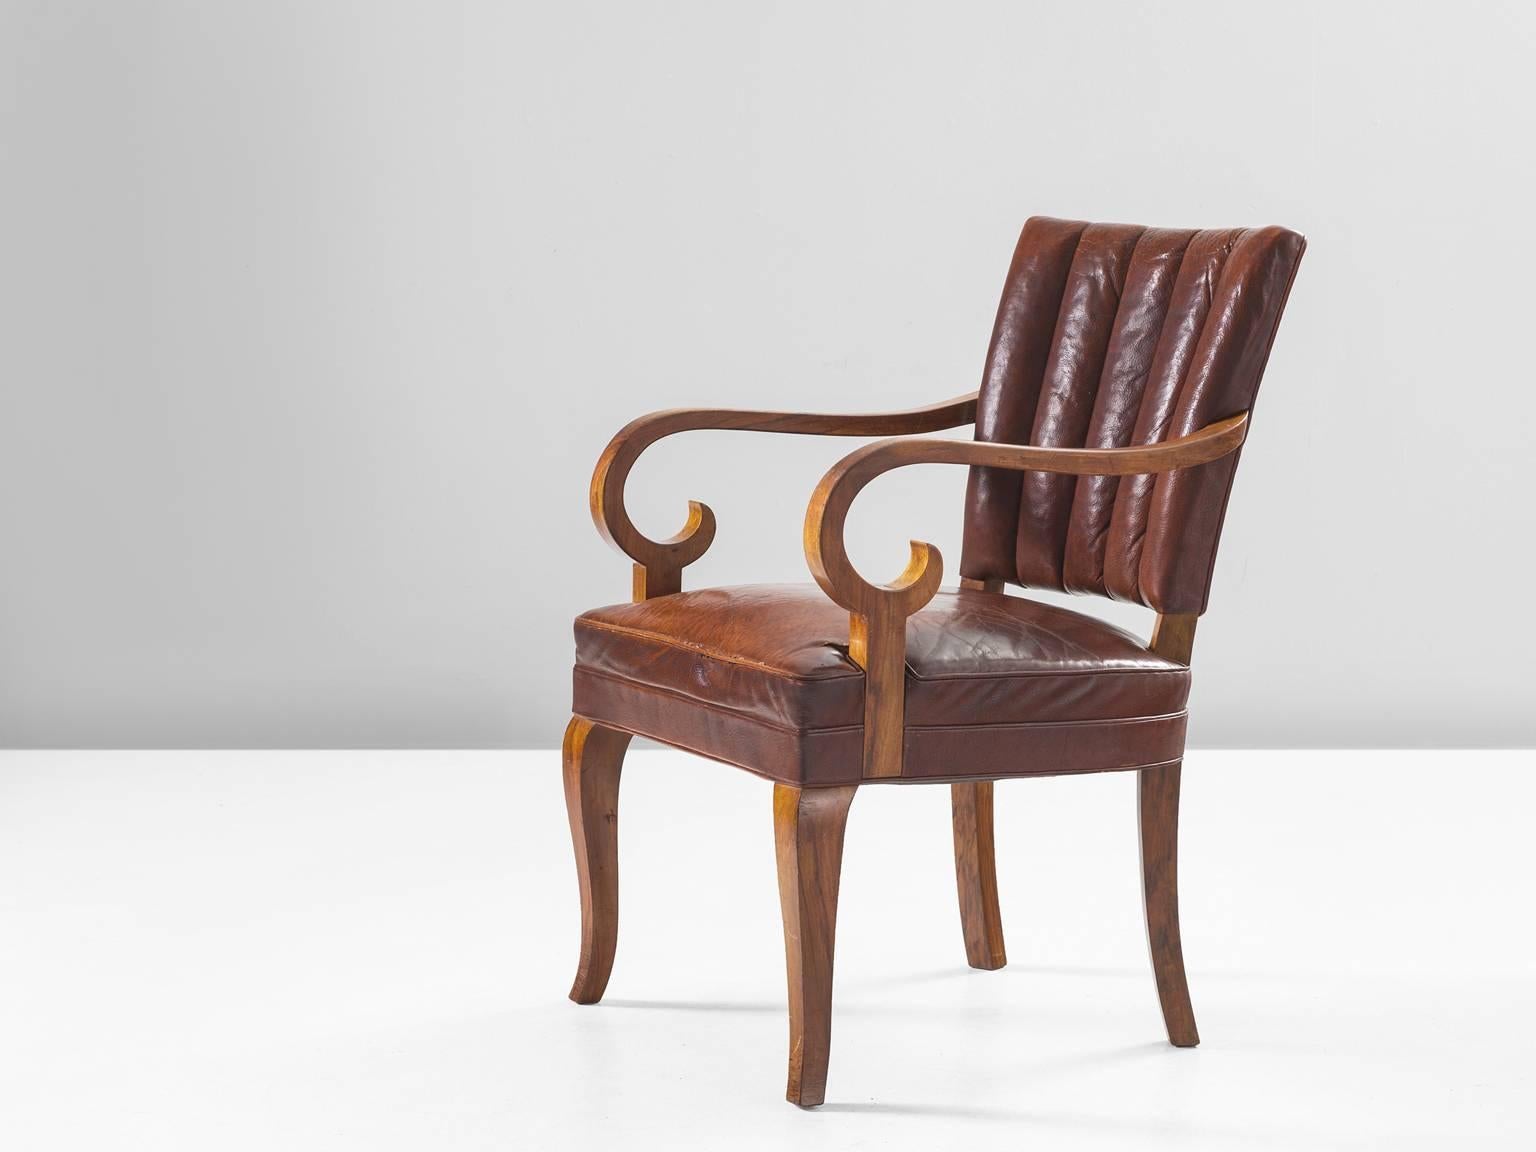 Armchair, leather and walnut, Denmark, 1940s.

This dining chair has incredible sensuous details. Take a look at the swirling armrests or the tapered and curved legs. The lines in the chair are very sharp whereas the forms in themselves are organic.